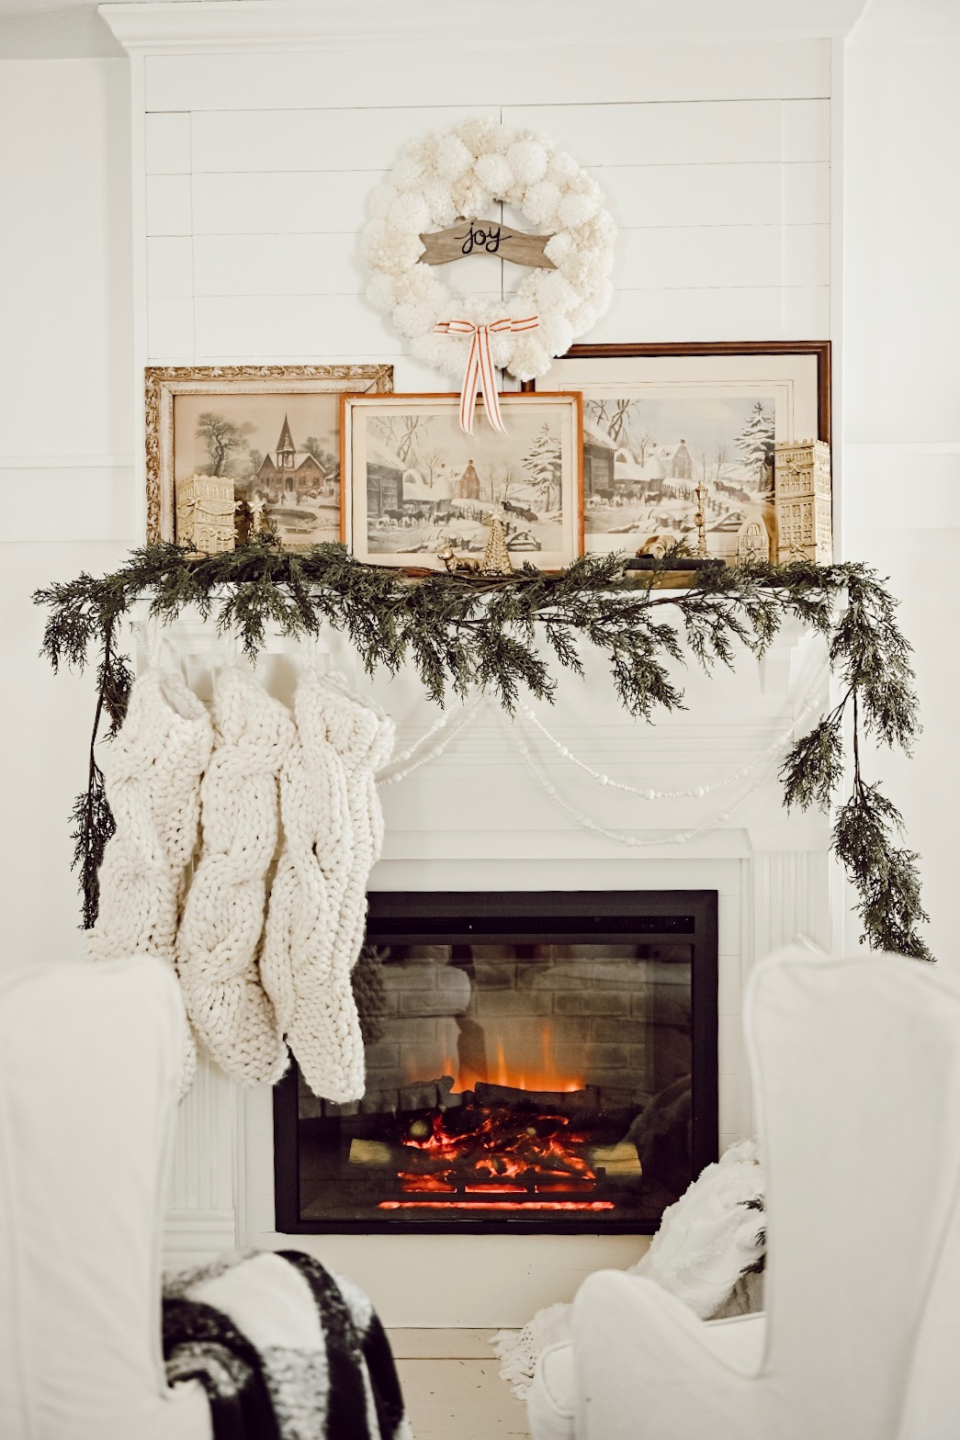 How to Decorate Your Home for Christmas?